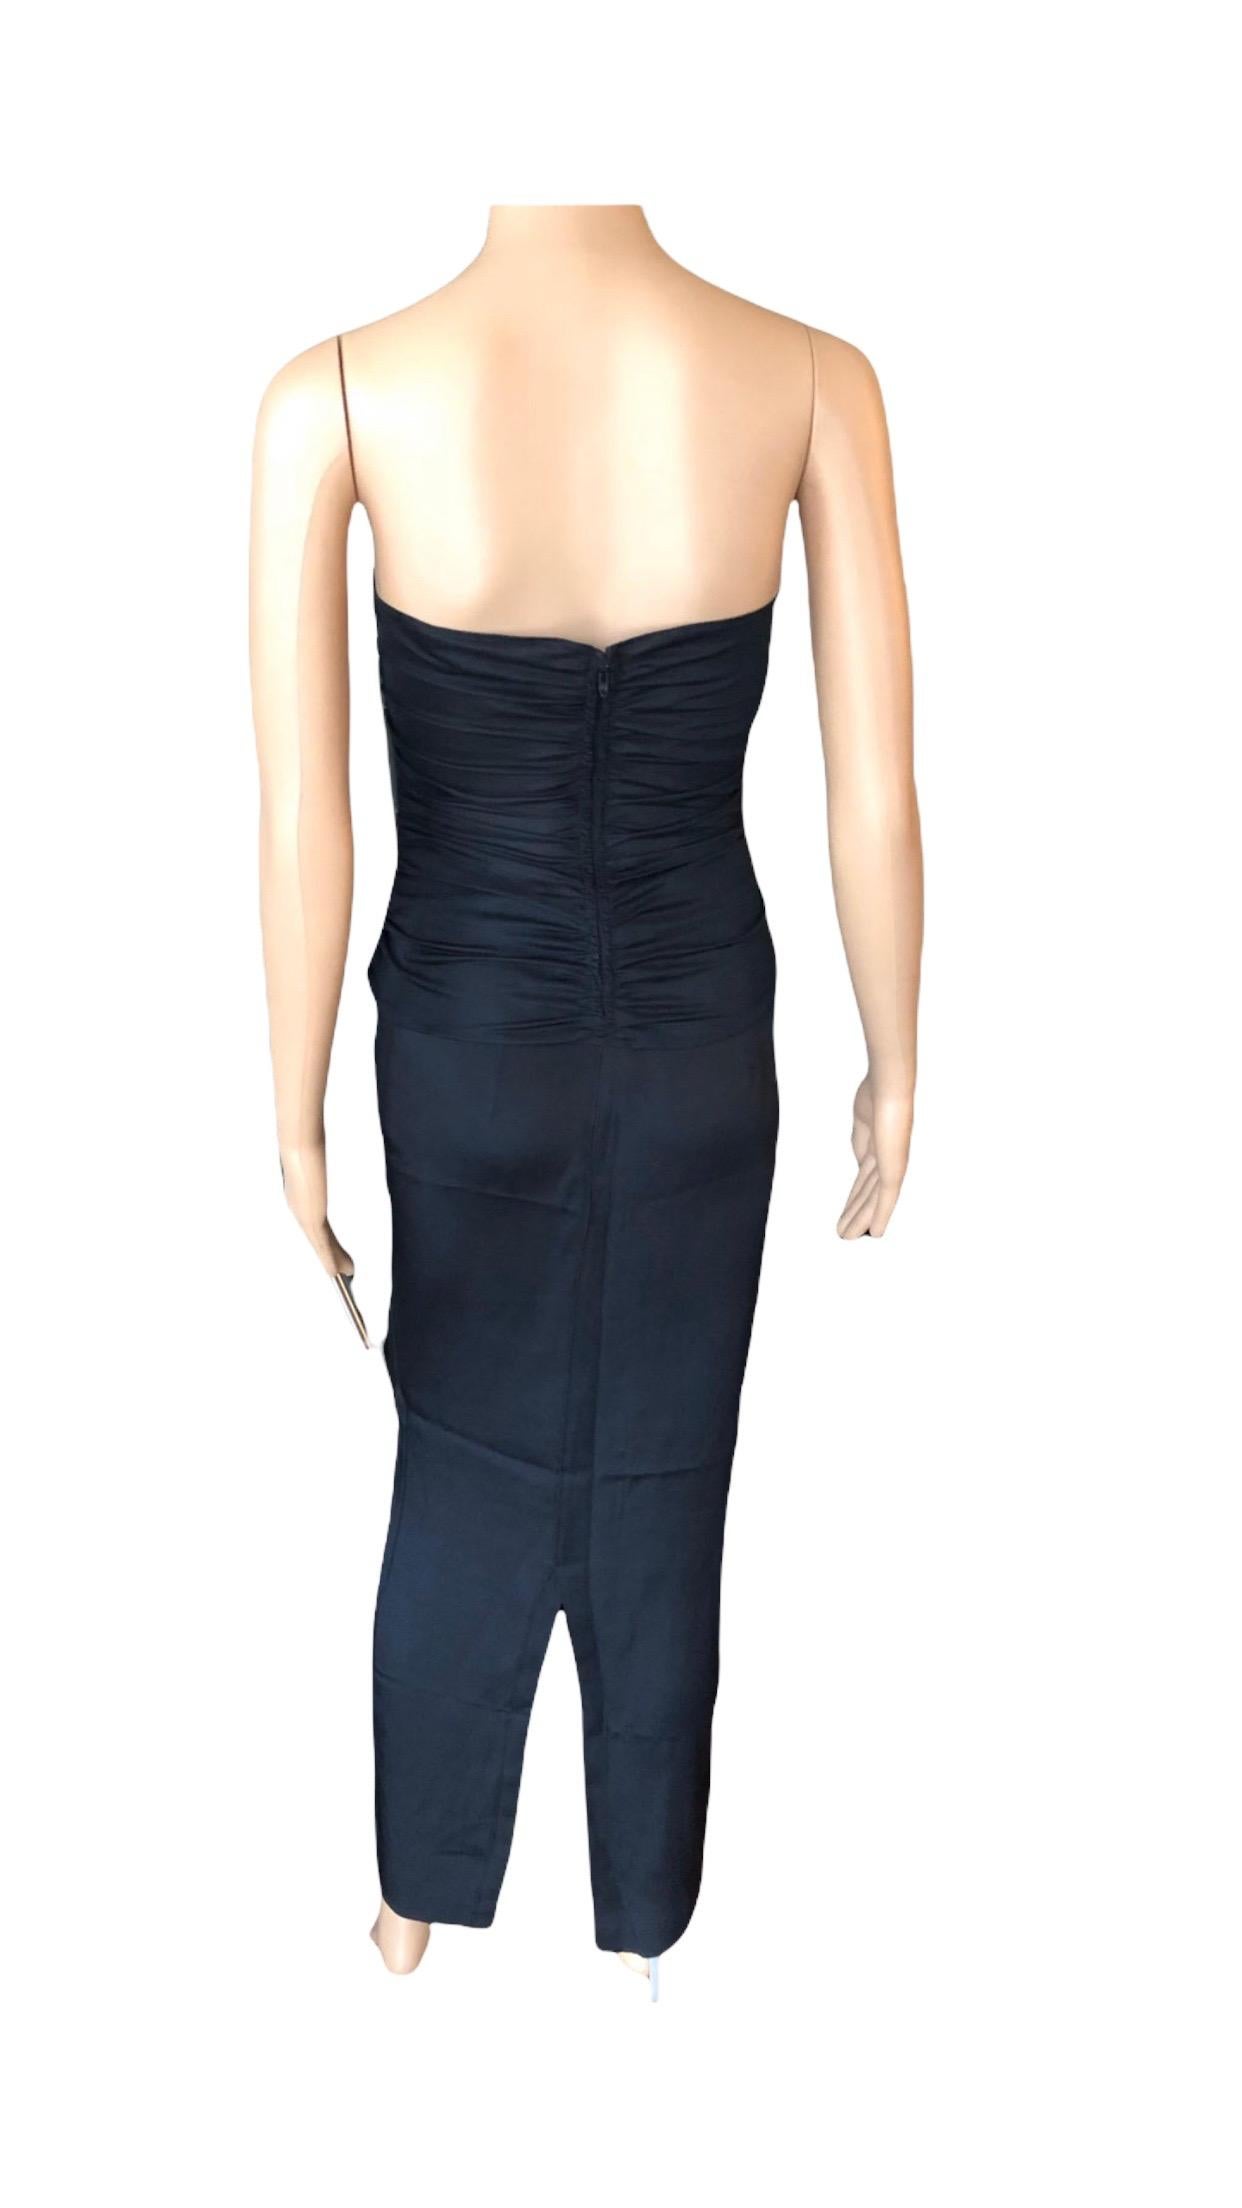 Gianni Versace F/W 1987 Vintage Sera Embellished Bustier Top&Skirt 2-Piece Suit  For Sale 4